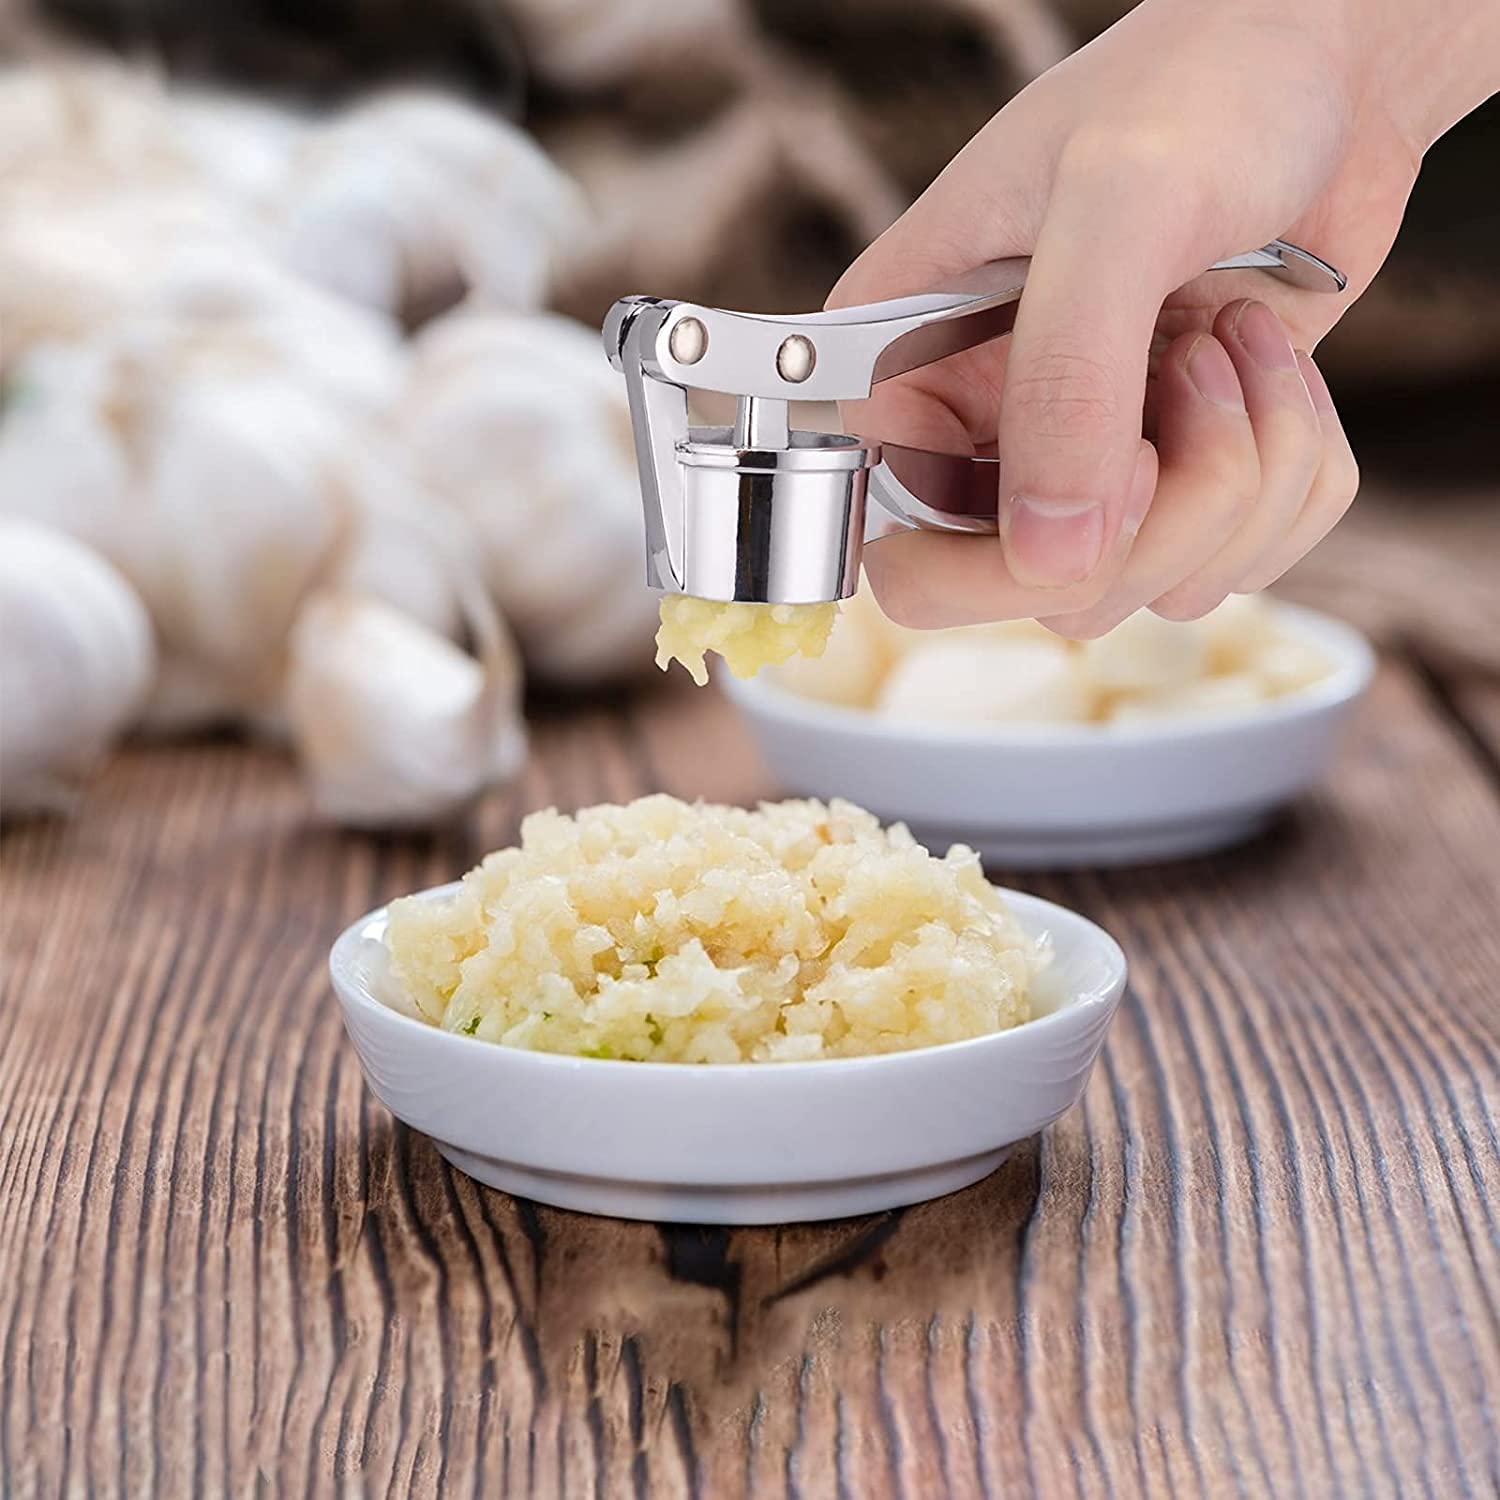 Vio Professional Kitchen Garlic Press, Garlic Mincer Ginger Crusher, Peeler Squeezer Heavy Duty Garlic Presser,Garlic Crush, User-Friendly Garlic Chopper, Easy to Clean and Durable